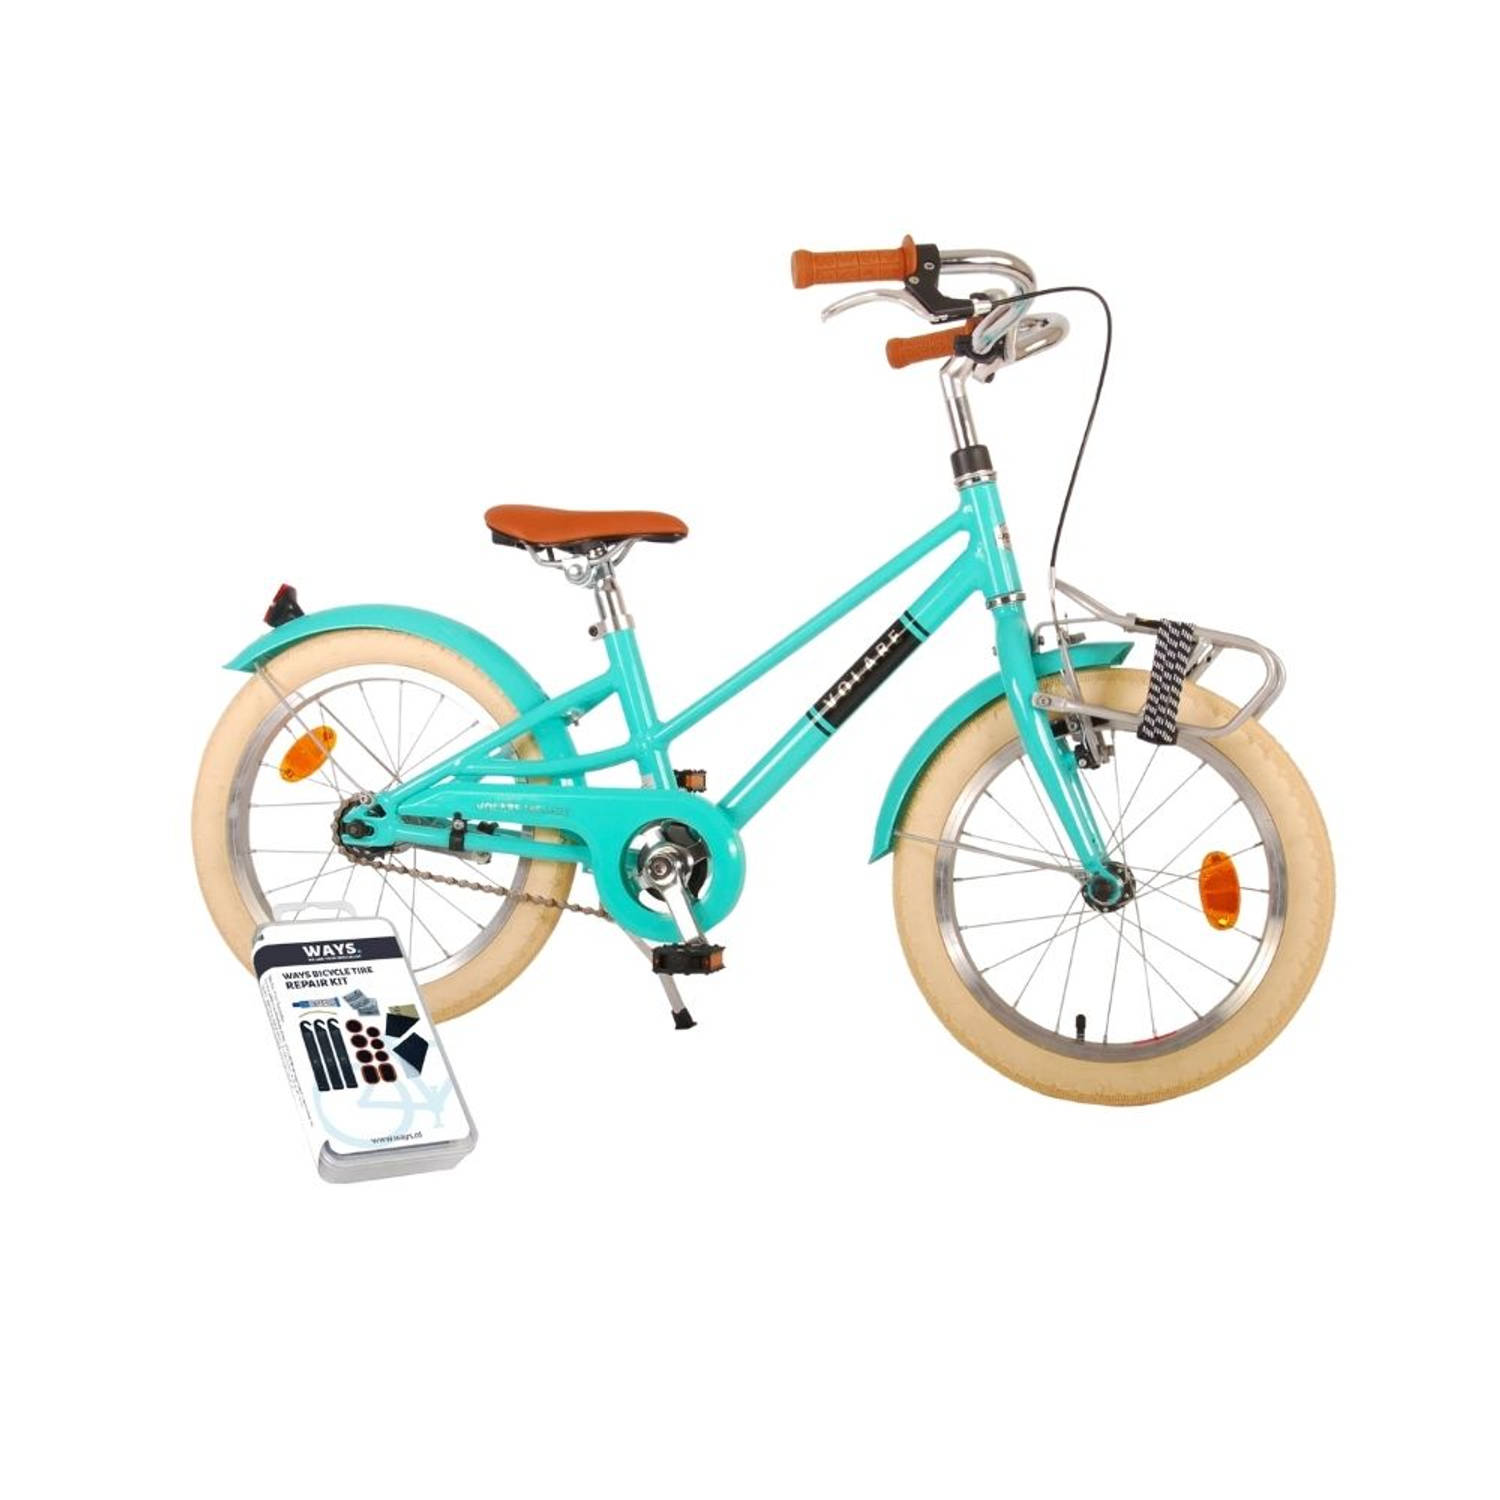 Volare Kinderfiets Melody - 16 inch - Turquoise - Inclusief WAYS Bandenplakset